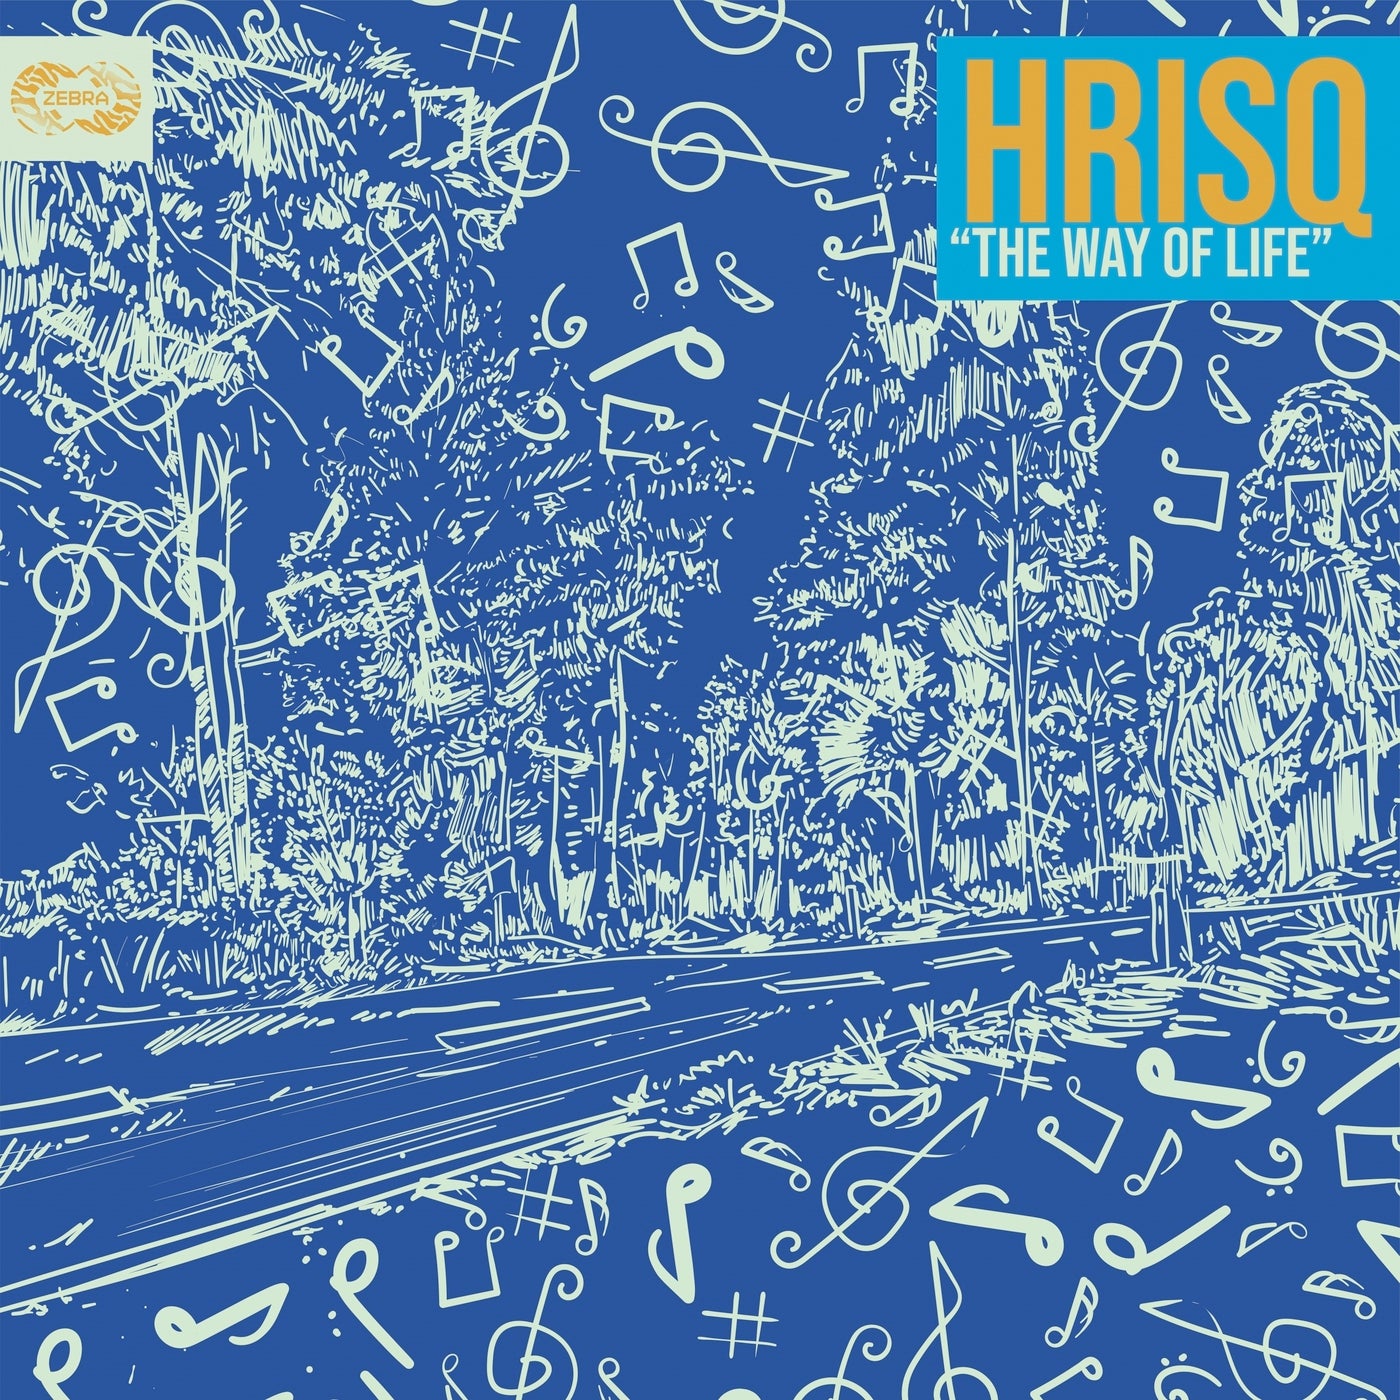 image cover: Hrisq - The Way of Life / 551137